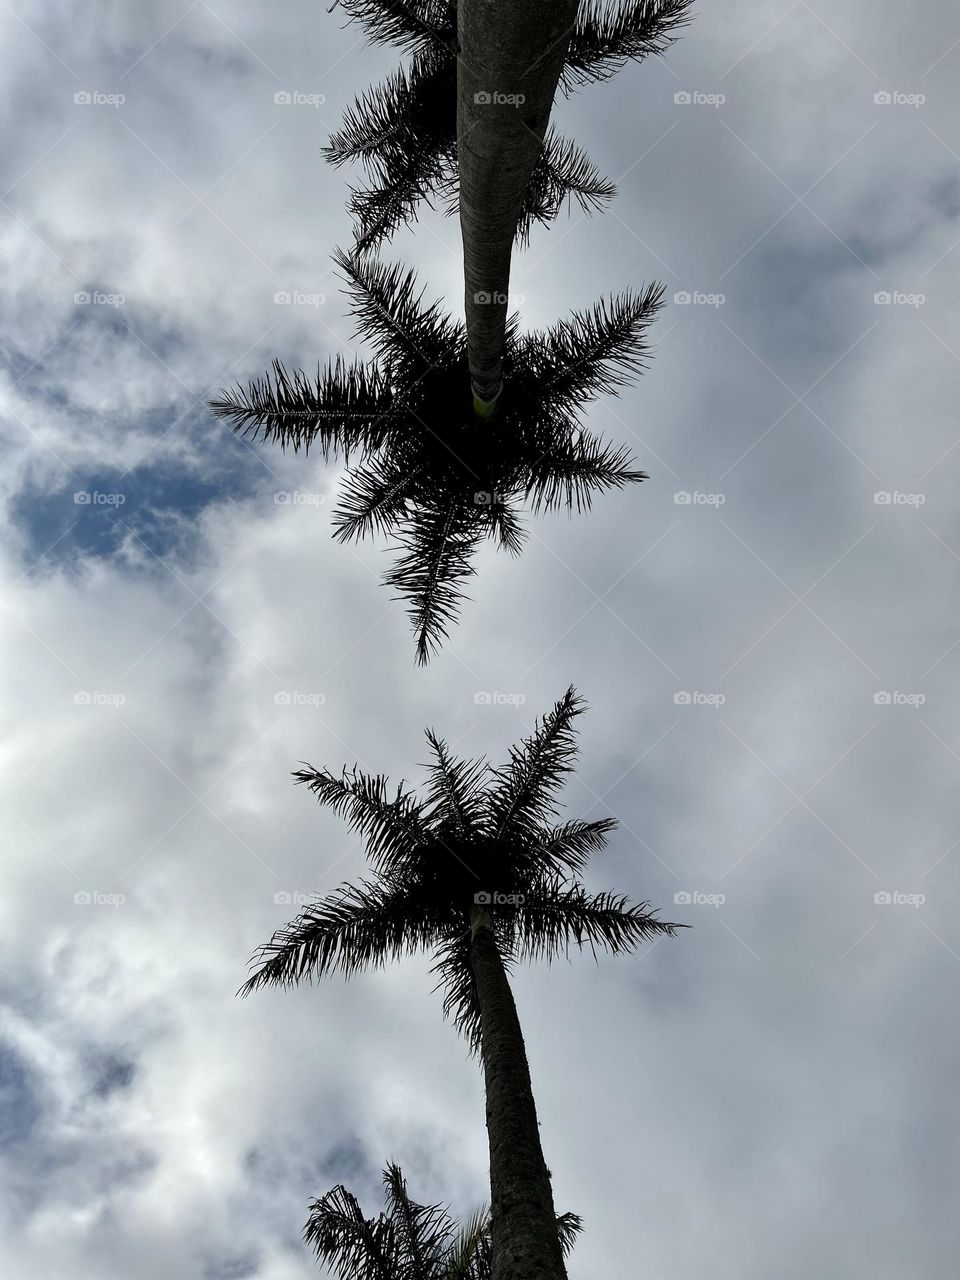 The palm trees and the sky